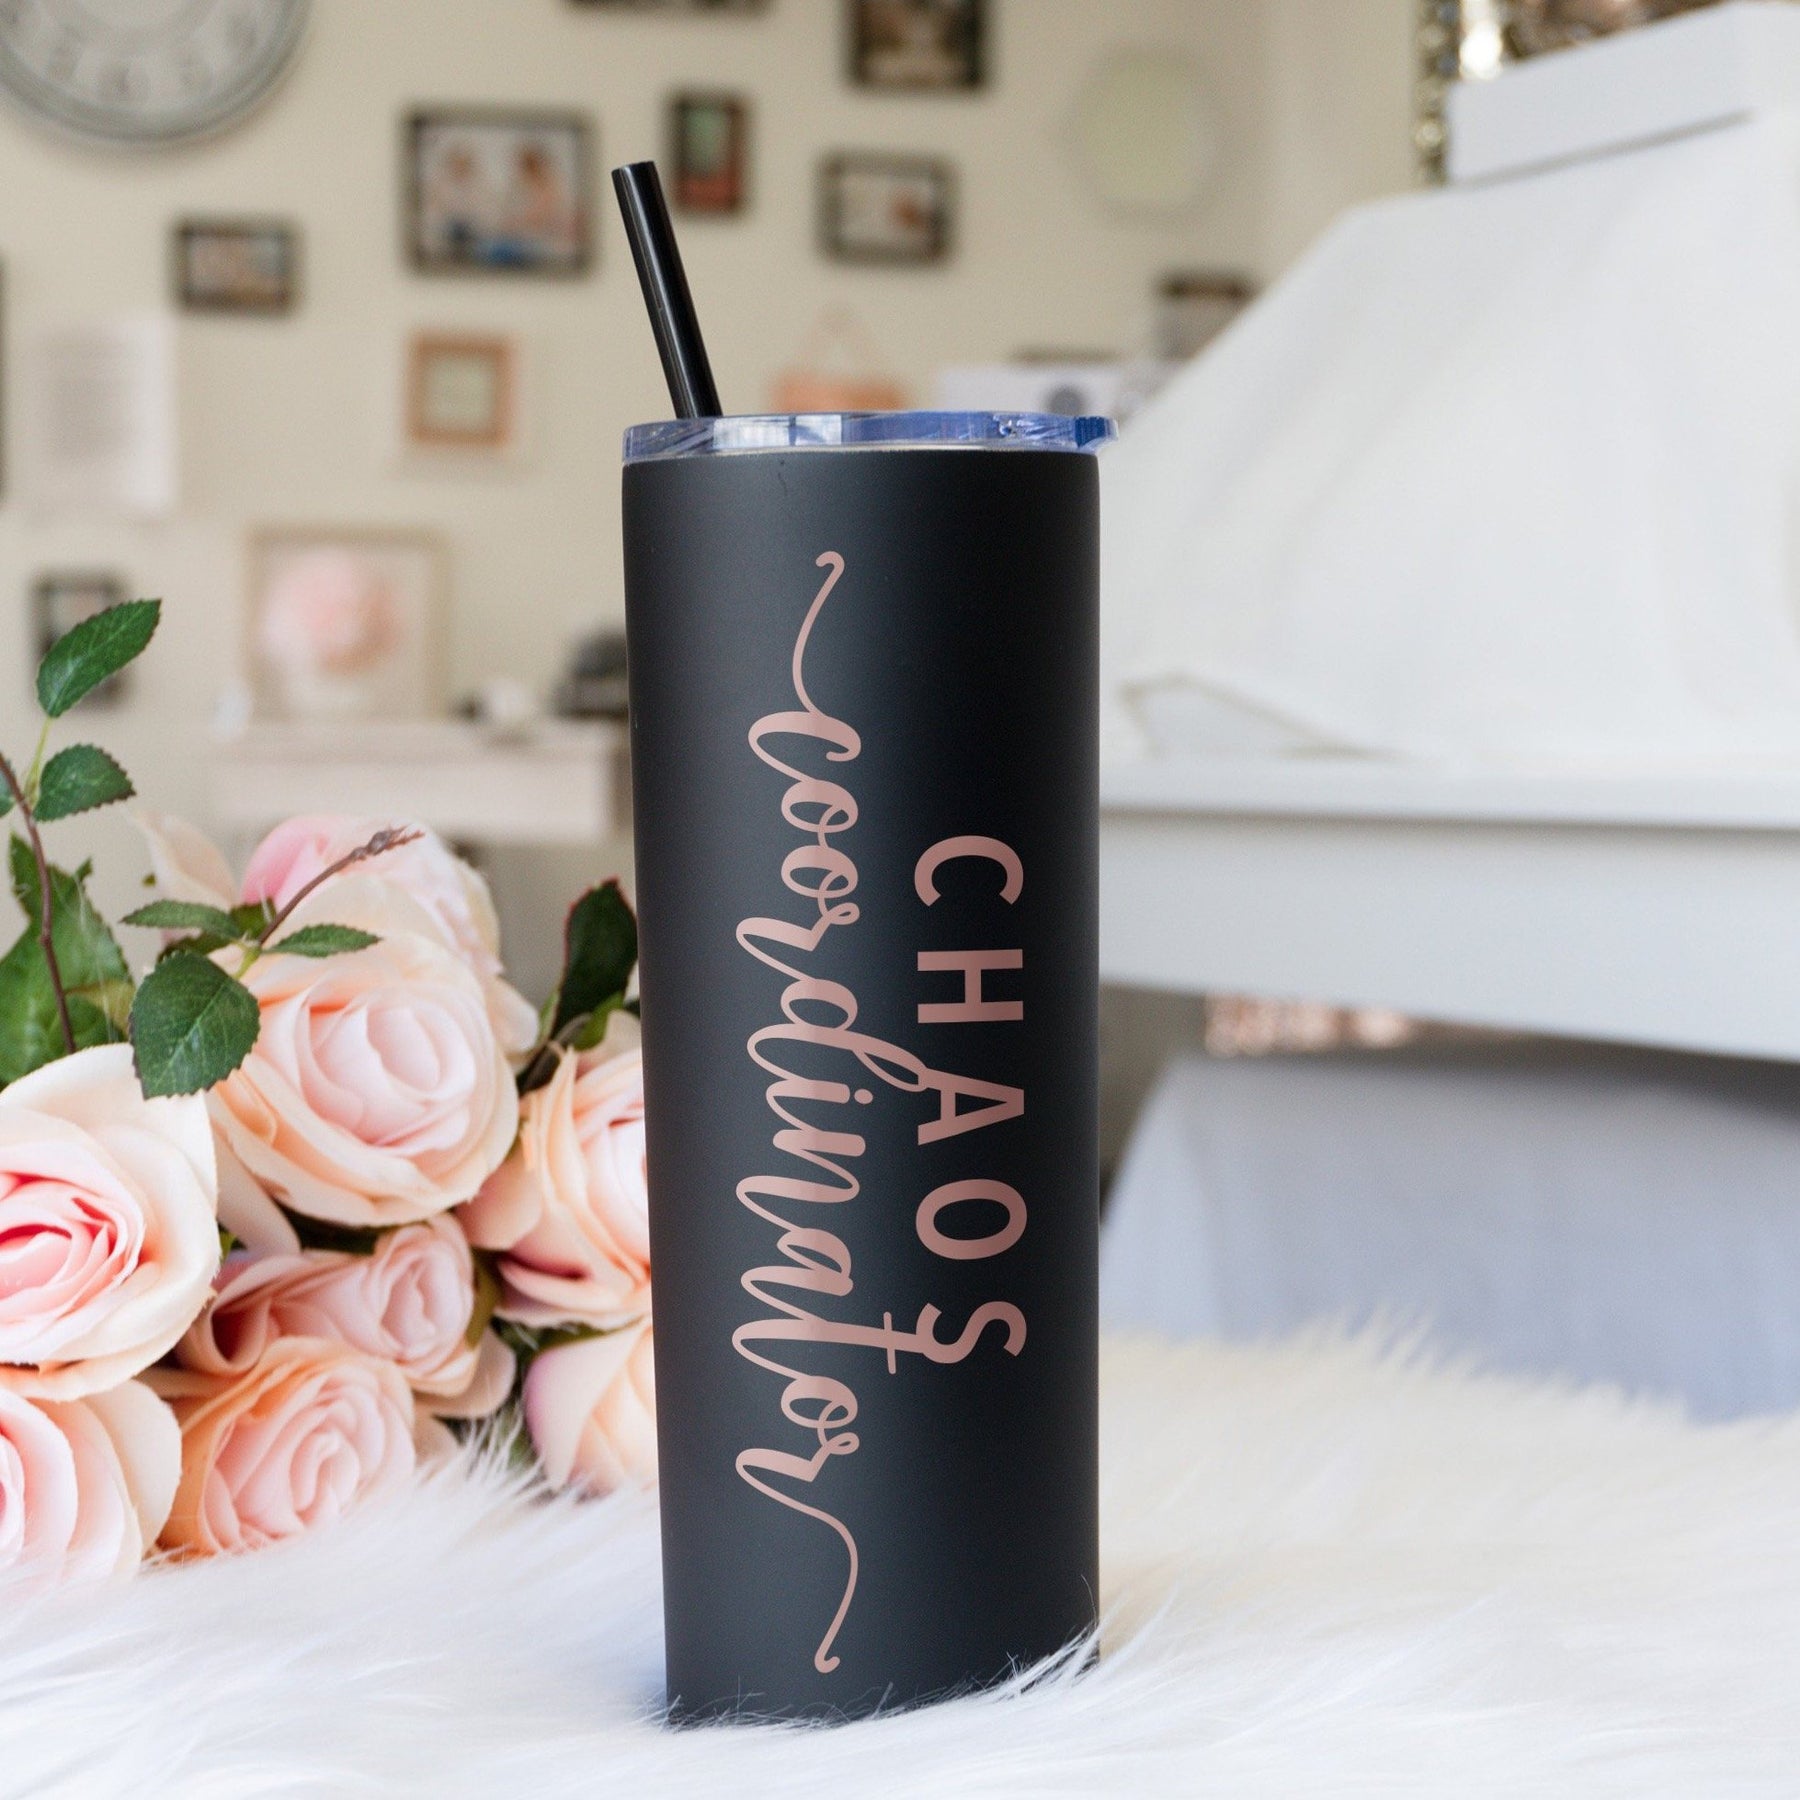 15 Personalized Mother's Day Gift Ideas To Make Her Feel Loved